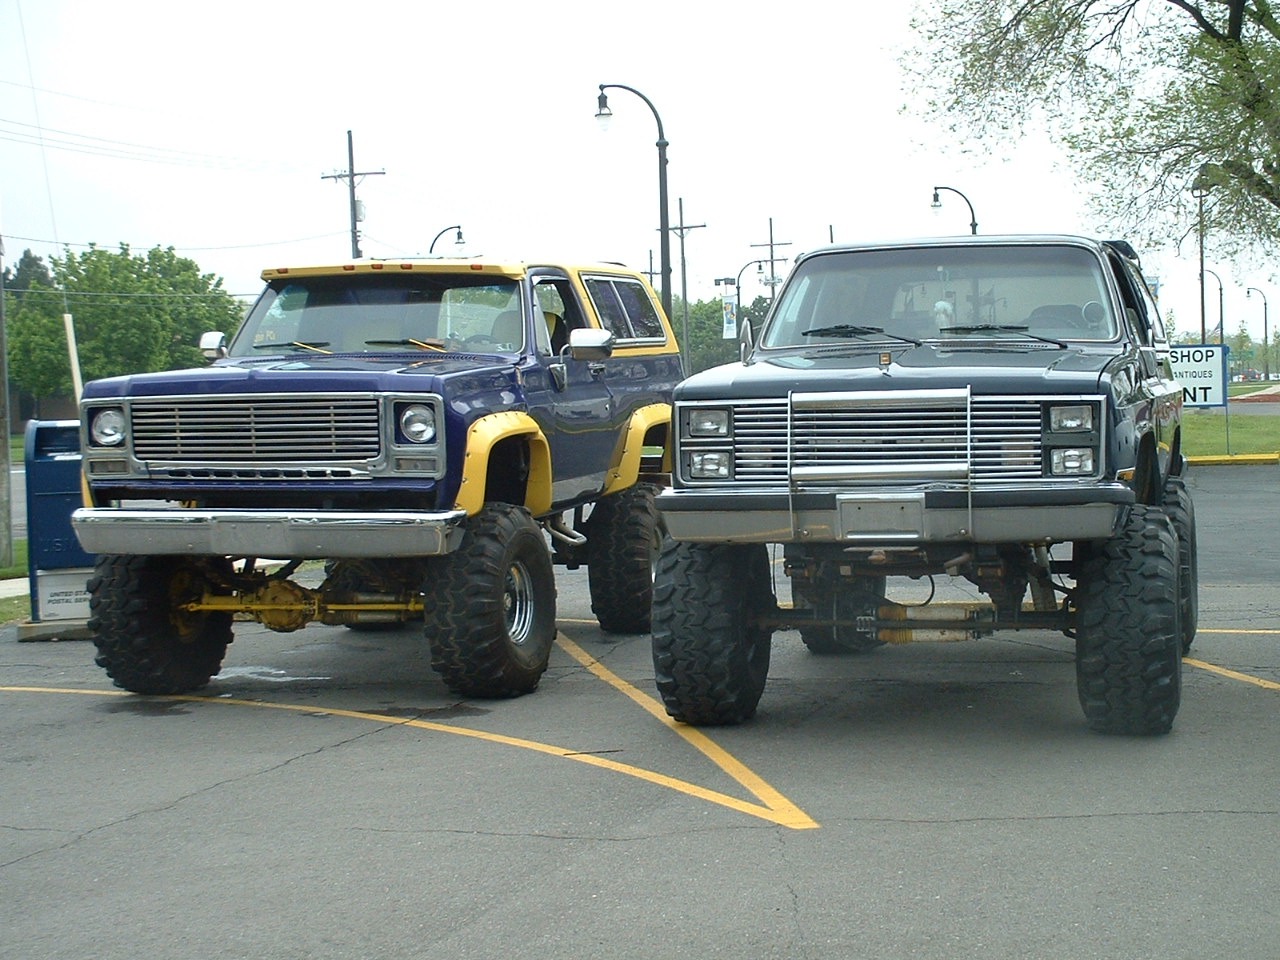 Heavily modified Chevrolet Blazer typical of the United States hobbyist off-roading scene